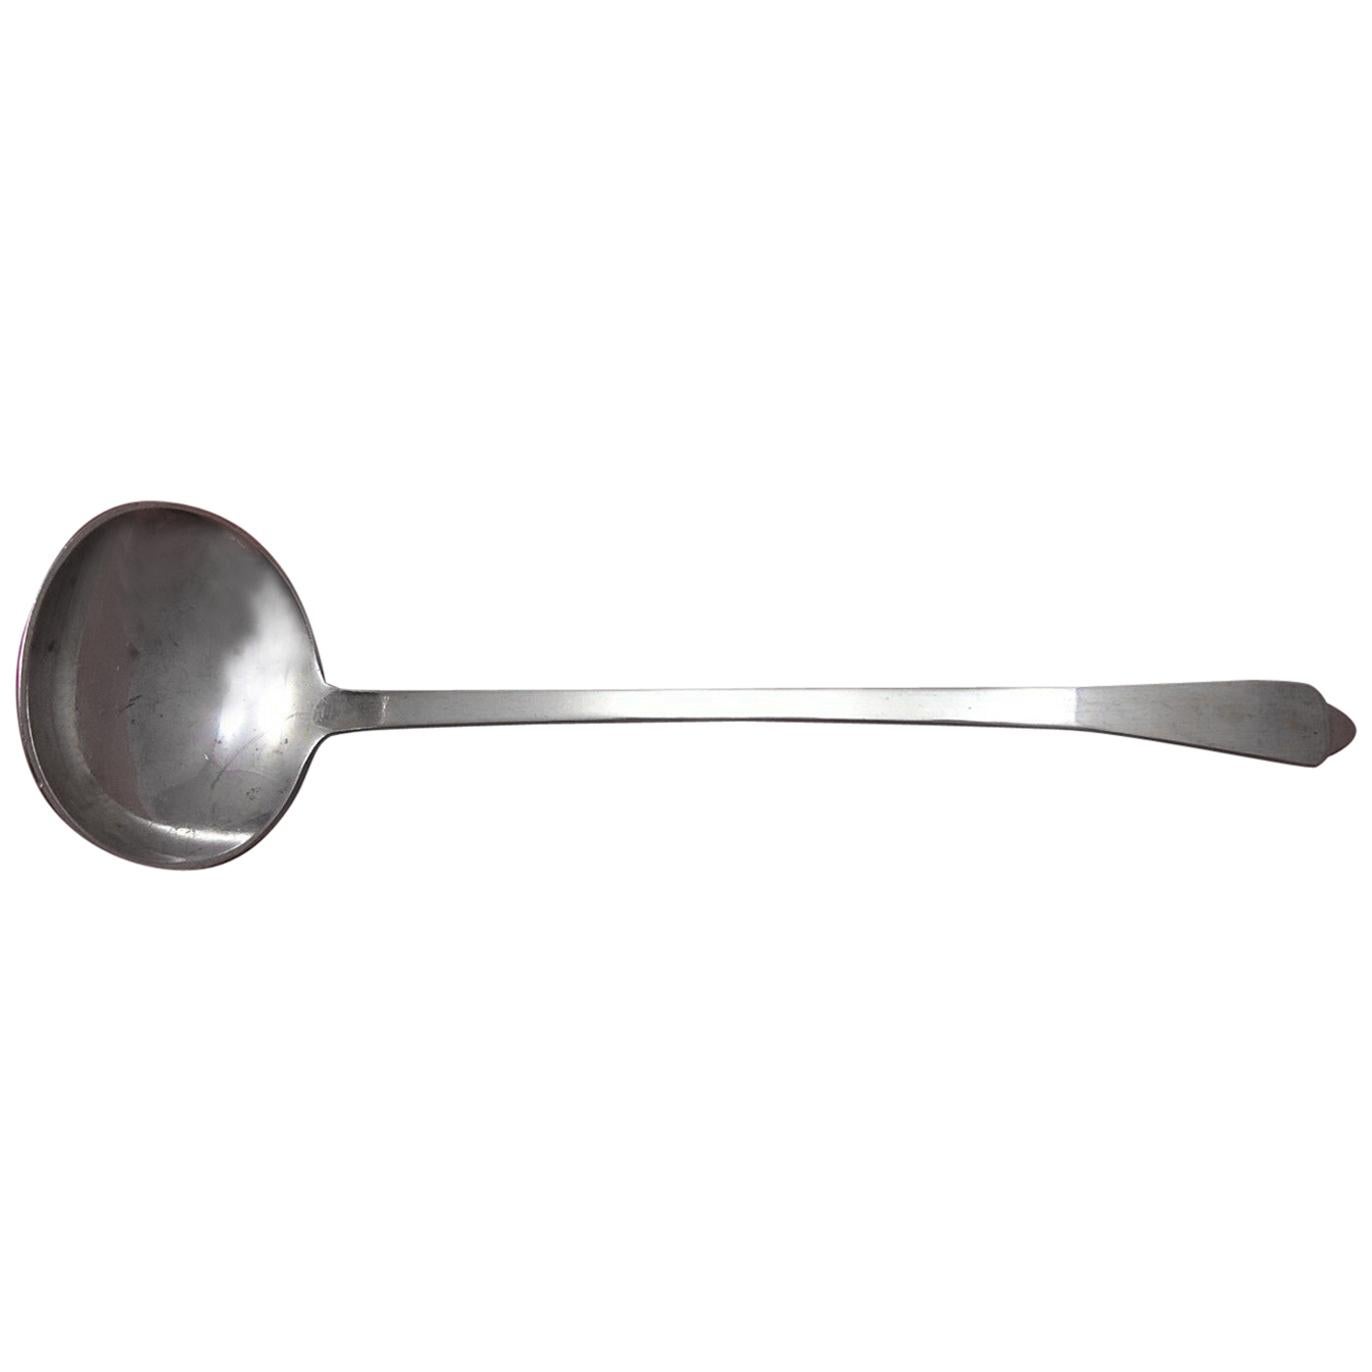 Clinton by Tiffany & Co. Sterling Silver Sauce Ladle